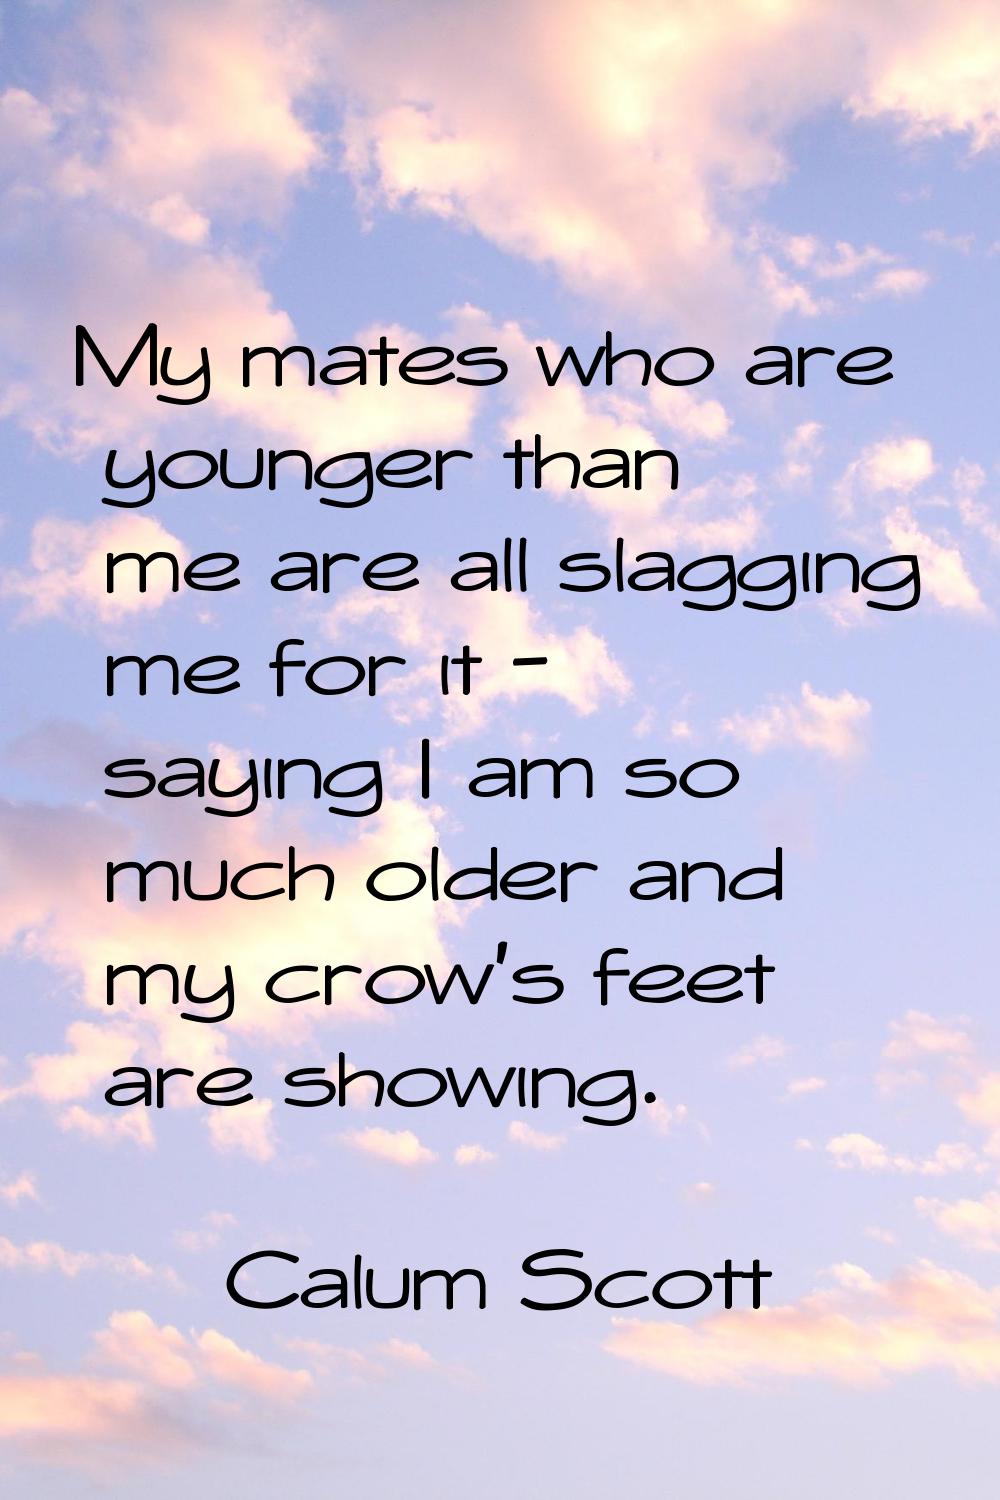 My mates who are younger than me are all slagging me for it - saying I am so much older and my crow